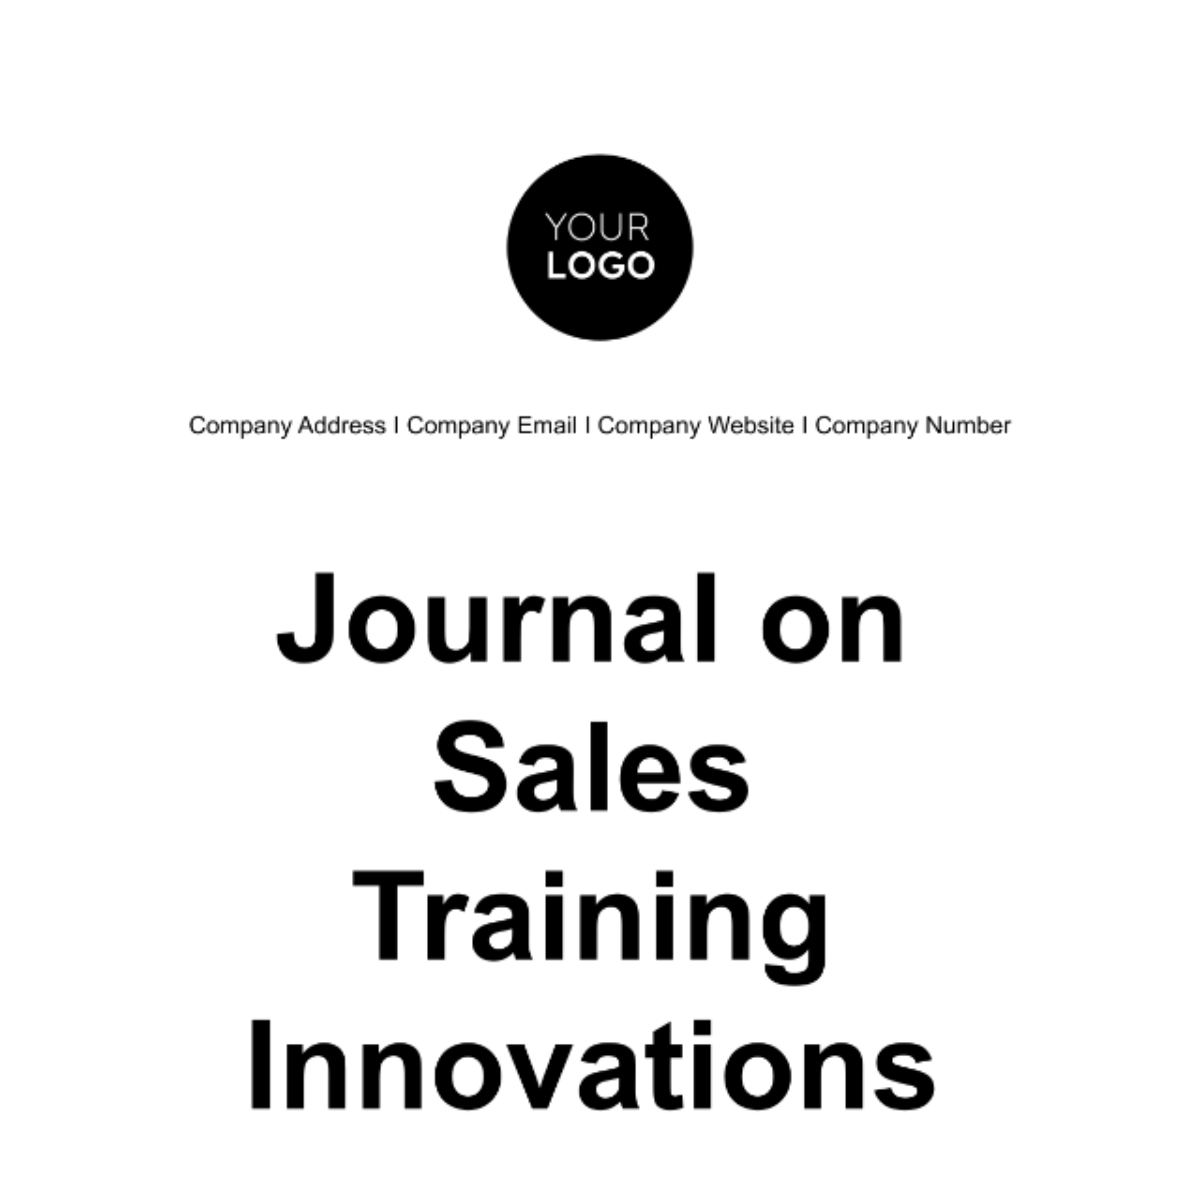 Free Journal on Sales Training Innovations Template